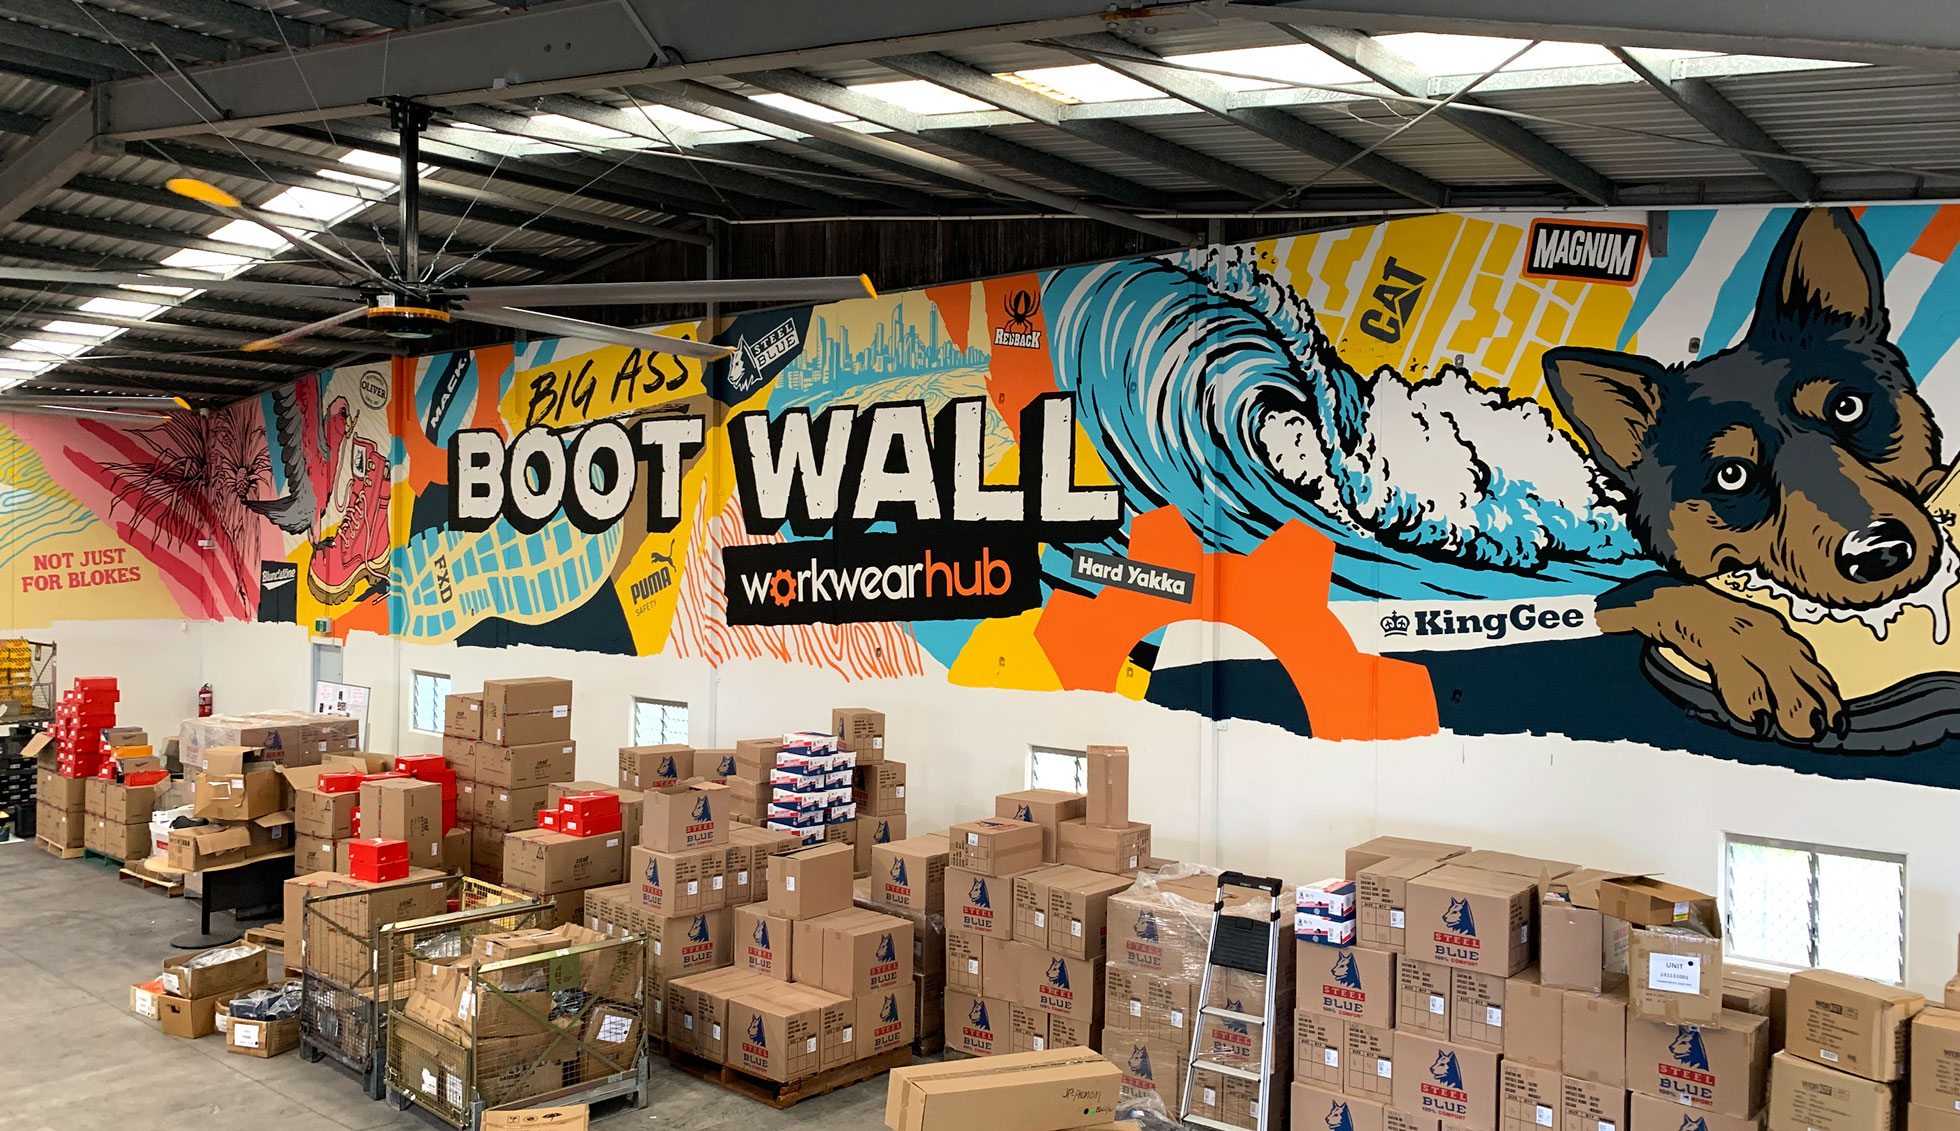 The mural spans over 30 metres of warehouse wall and sits above the shopping space. It features iconic boot brand logos, and graphics of boots, surf and animals relevant to the Gold Coast.